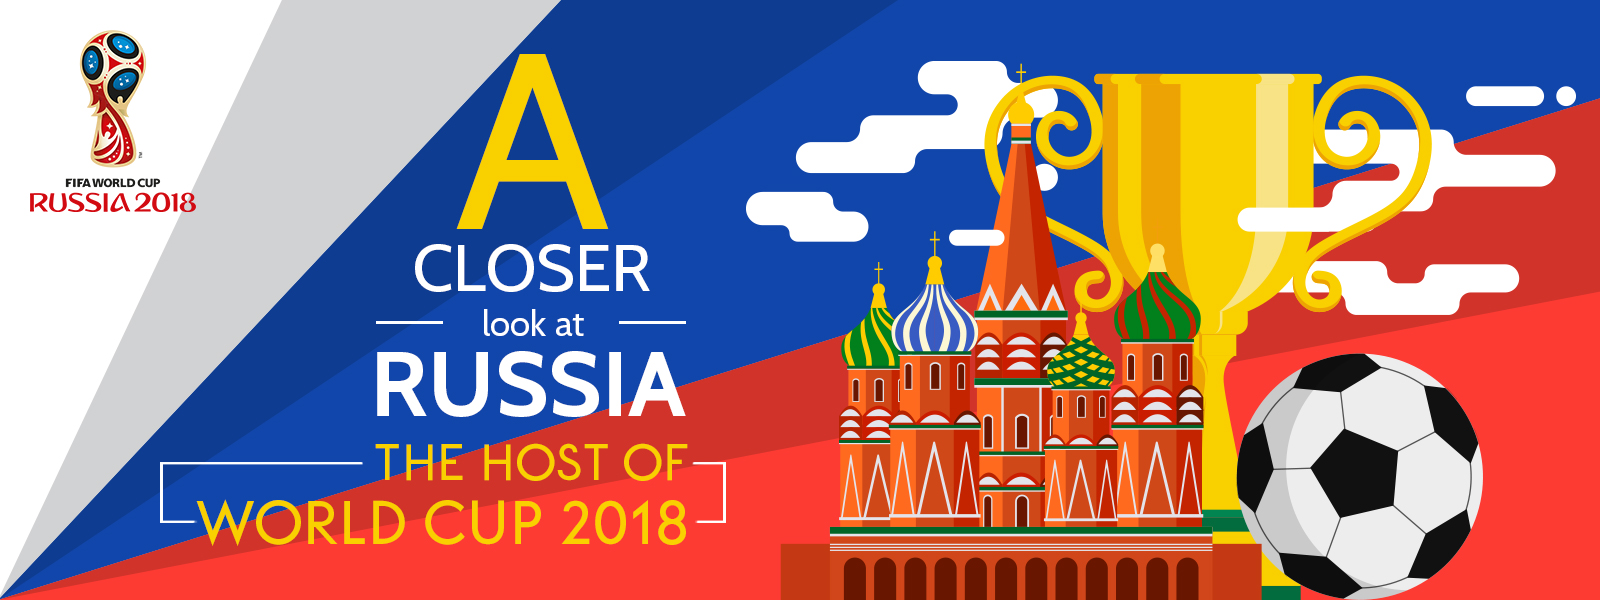 A close look at Russia ?C The host of World Cup 2018